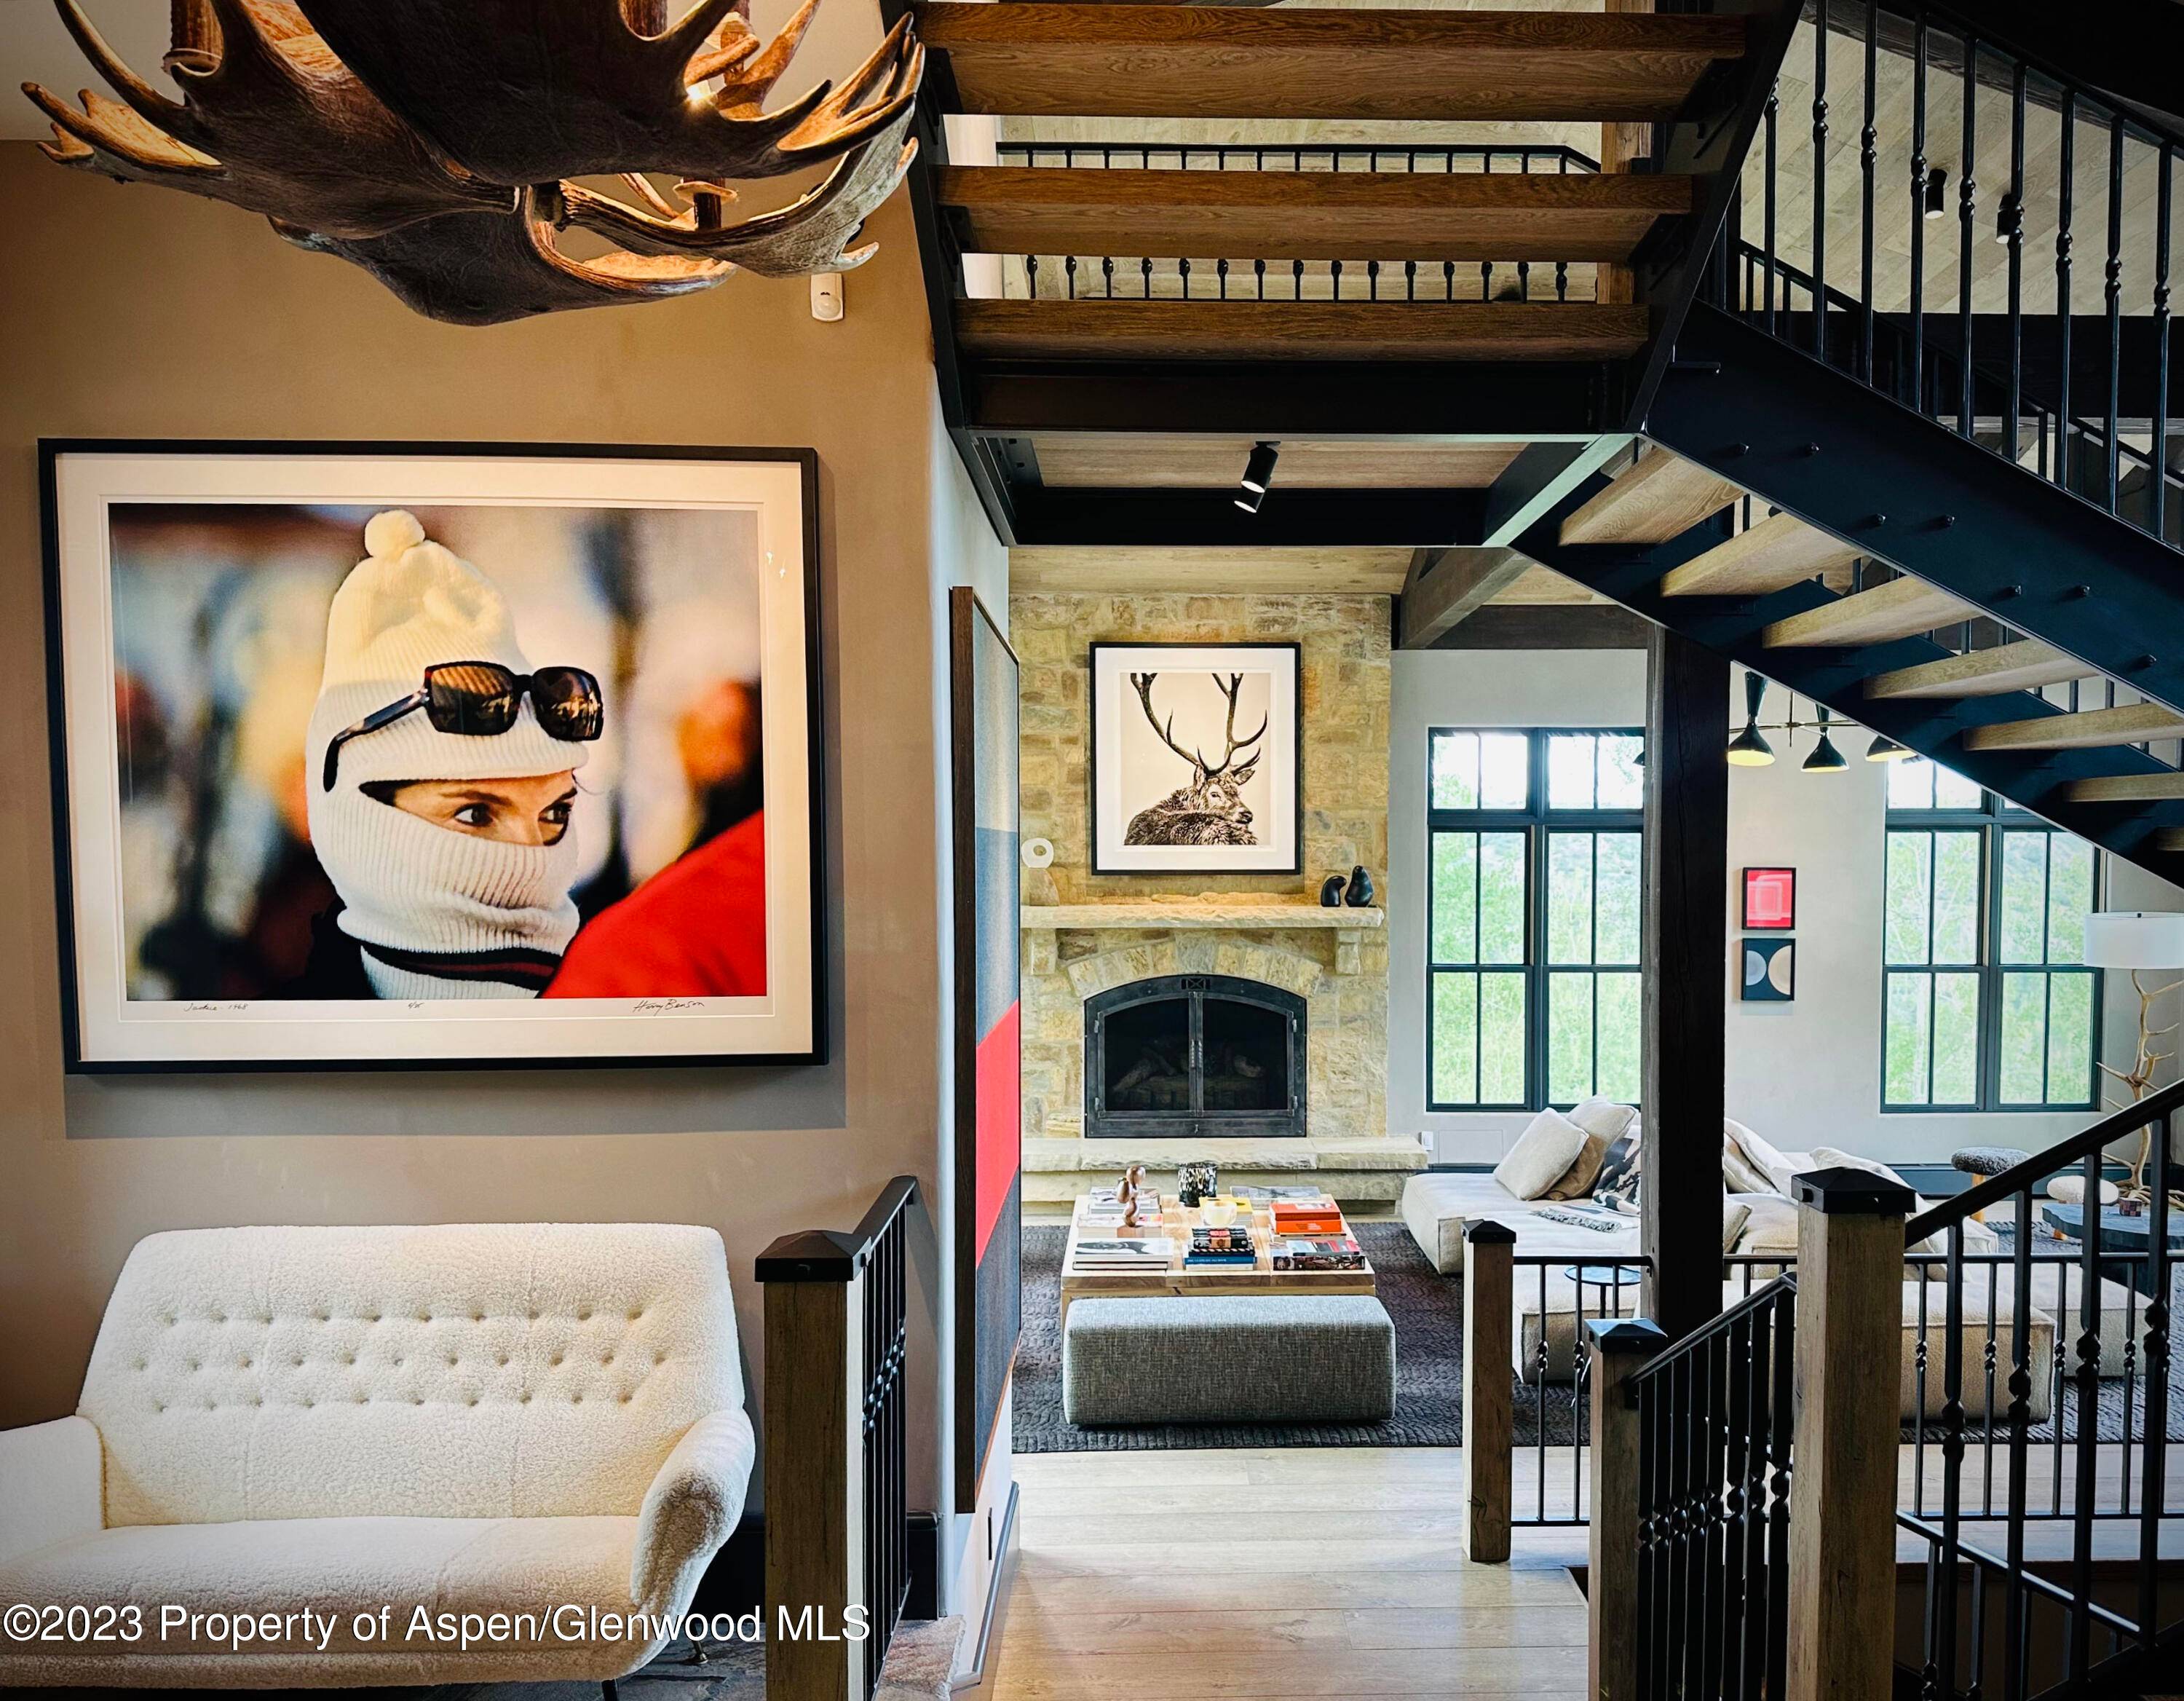 Ski in to this sprawling modern chalet located in Snowmass Village's most exclusive enclave.